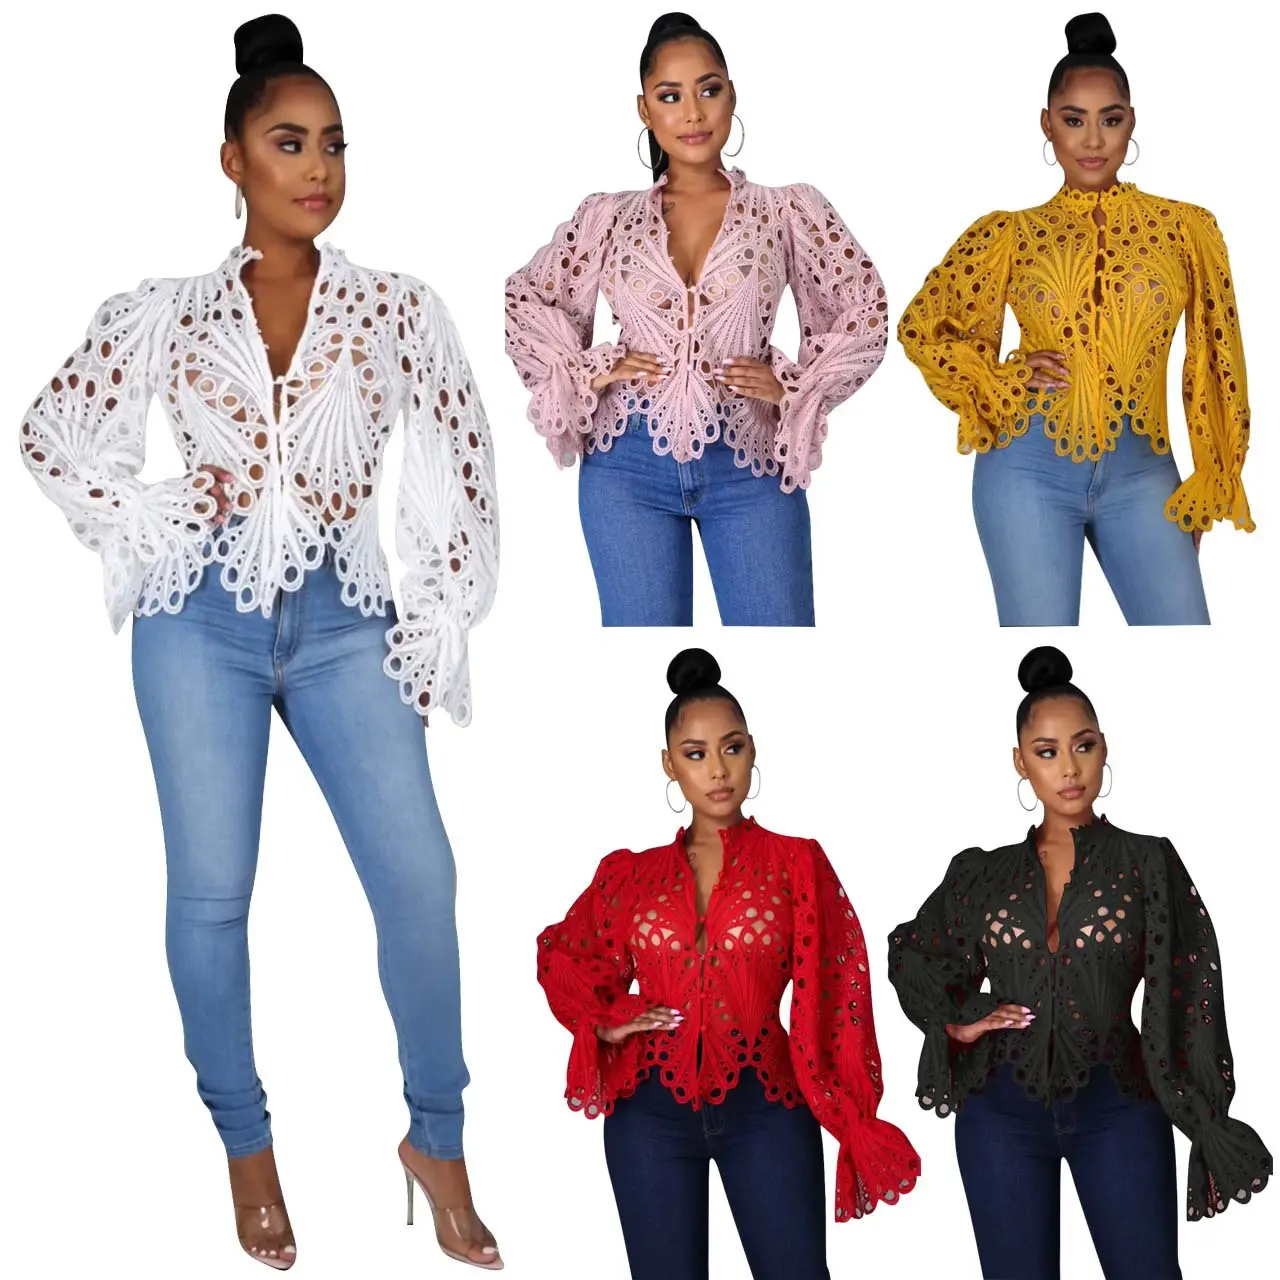 BA501 top selling unique design hot sale sexy women's blouses & shirts with holes